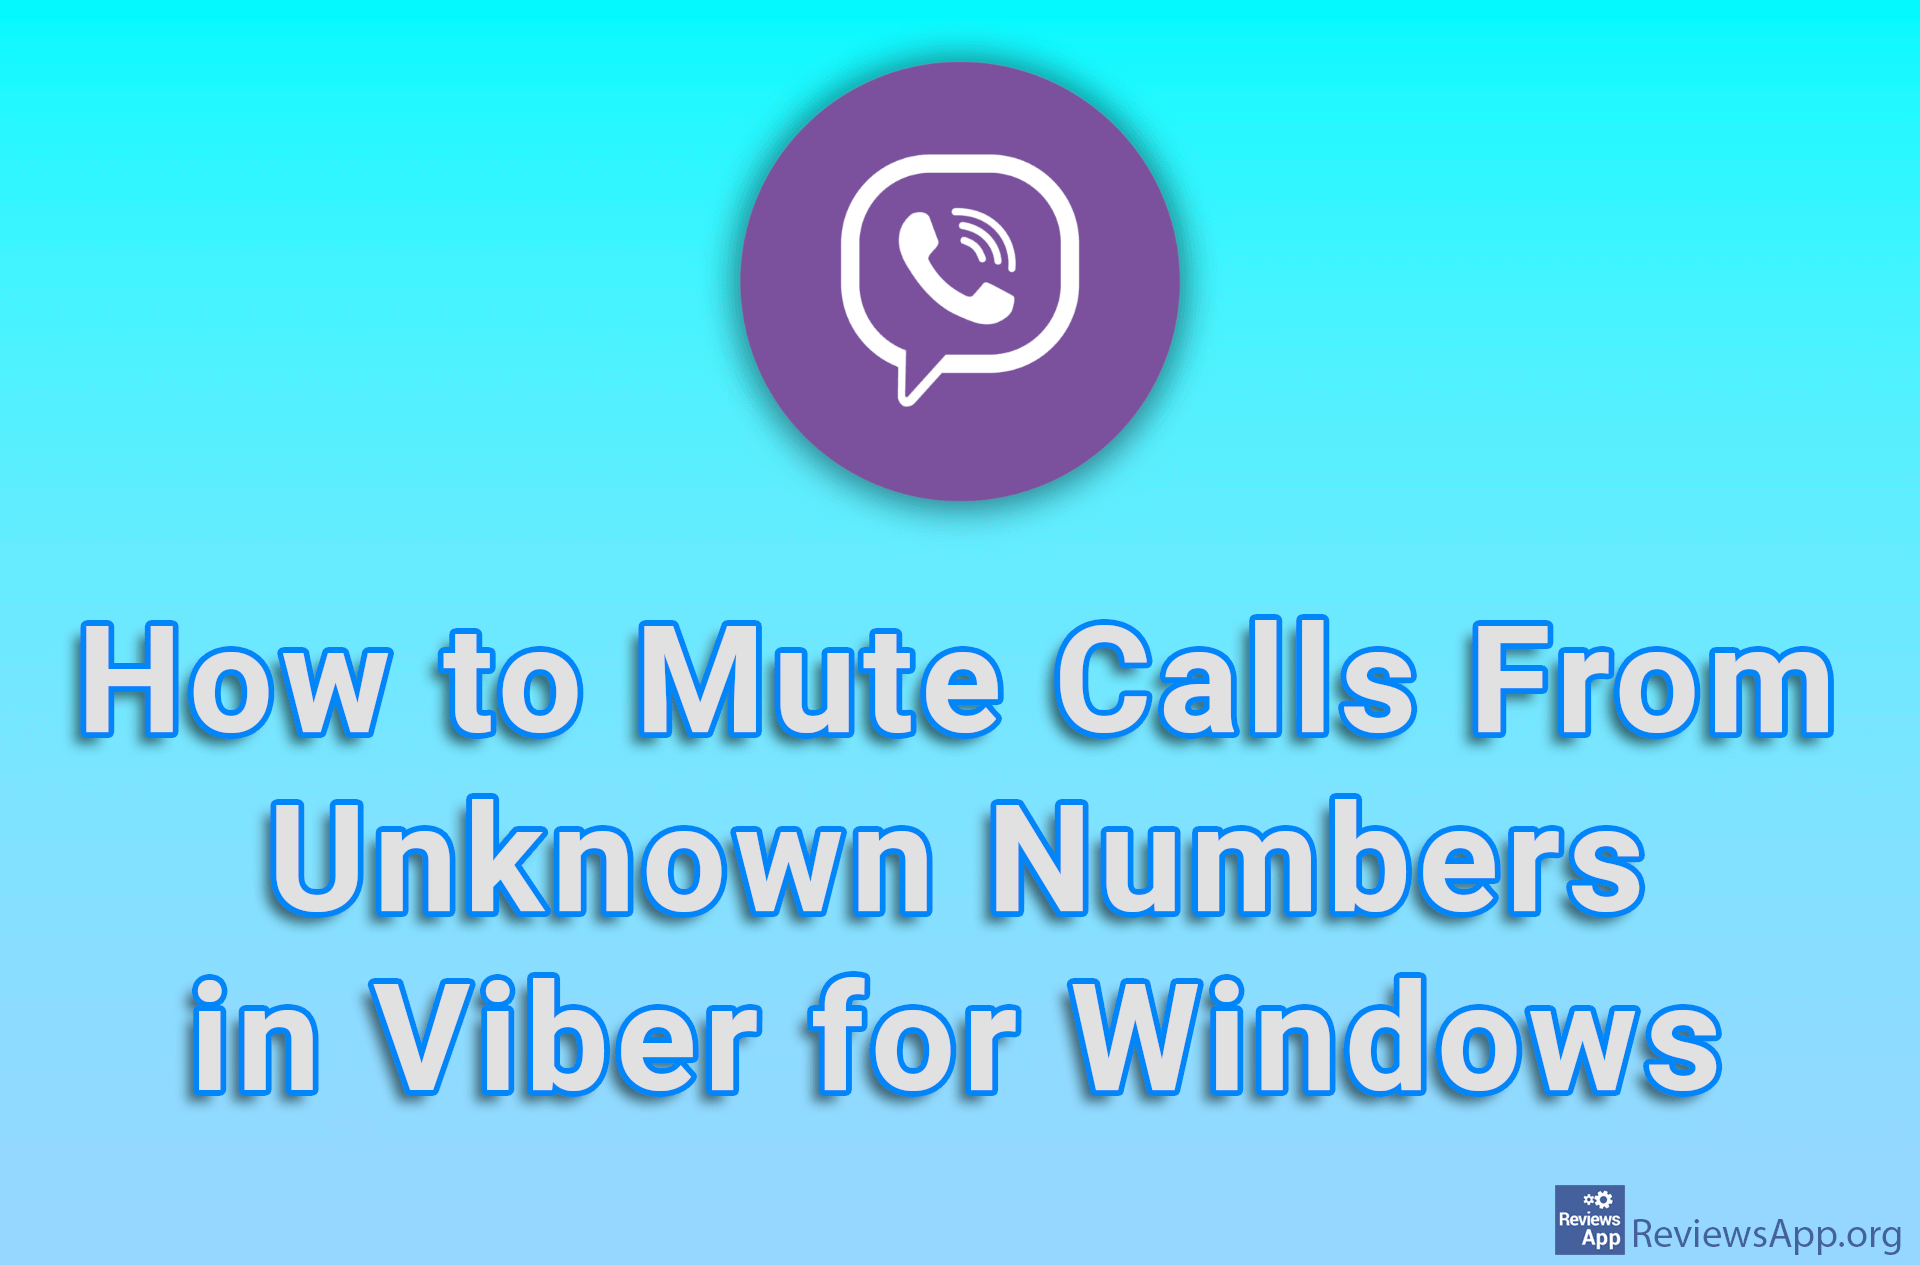 How to Mute Calls From Unknown Numbers in Viber for Windows